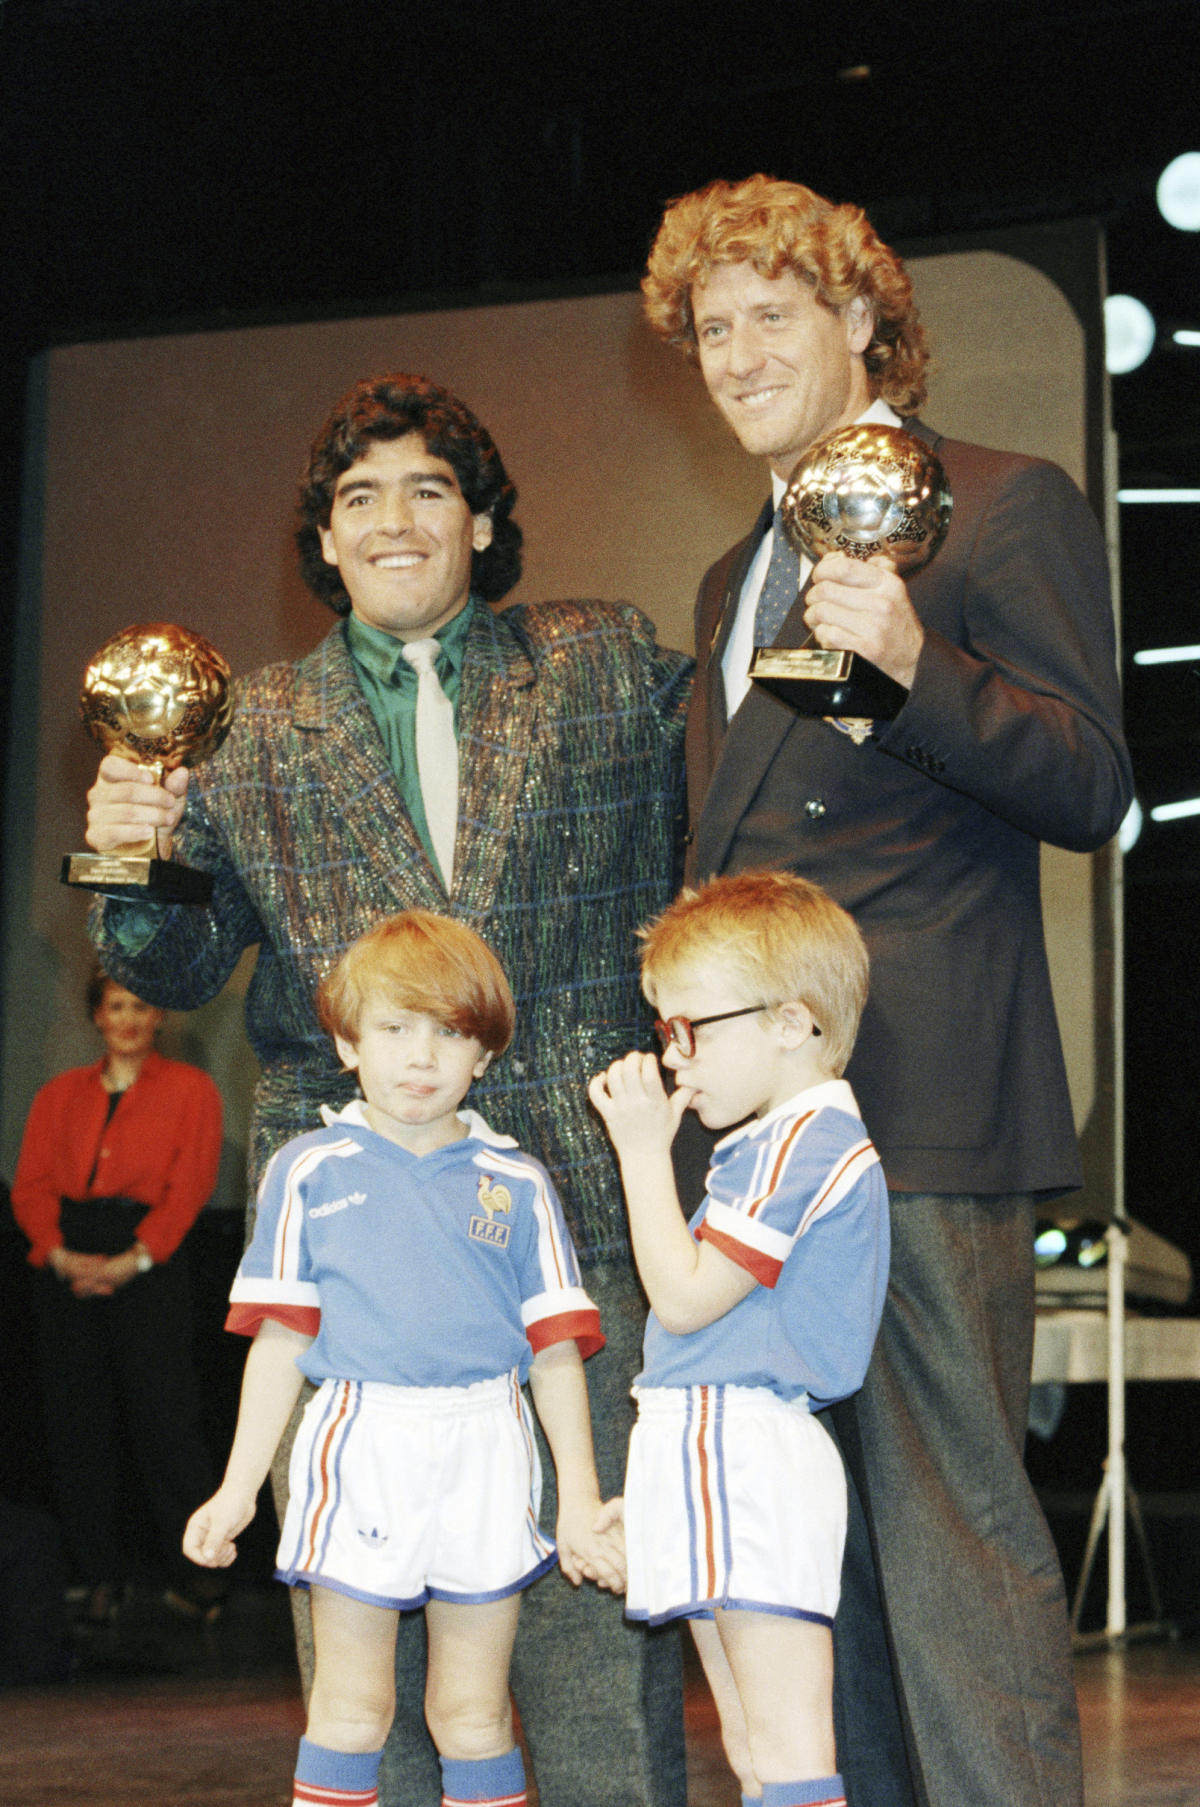 The disappearance of Maradona’s World Cup Golden Ball trophy sparks an auction in Paris.